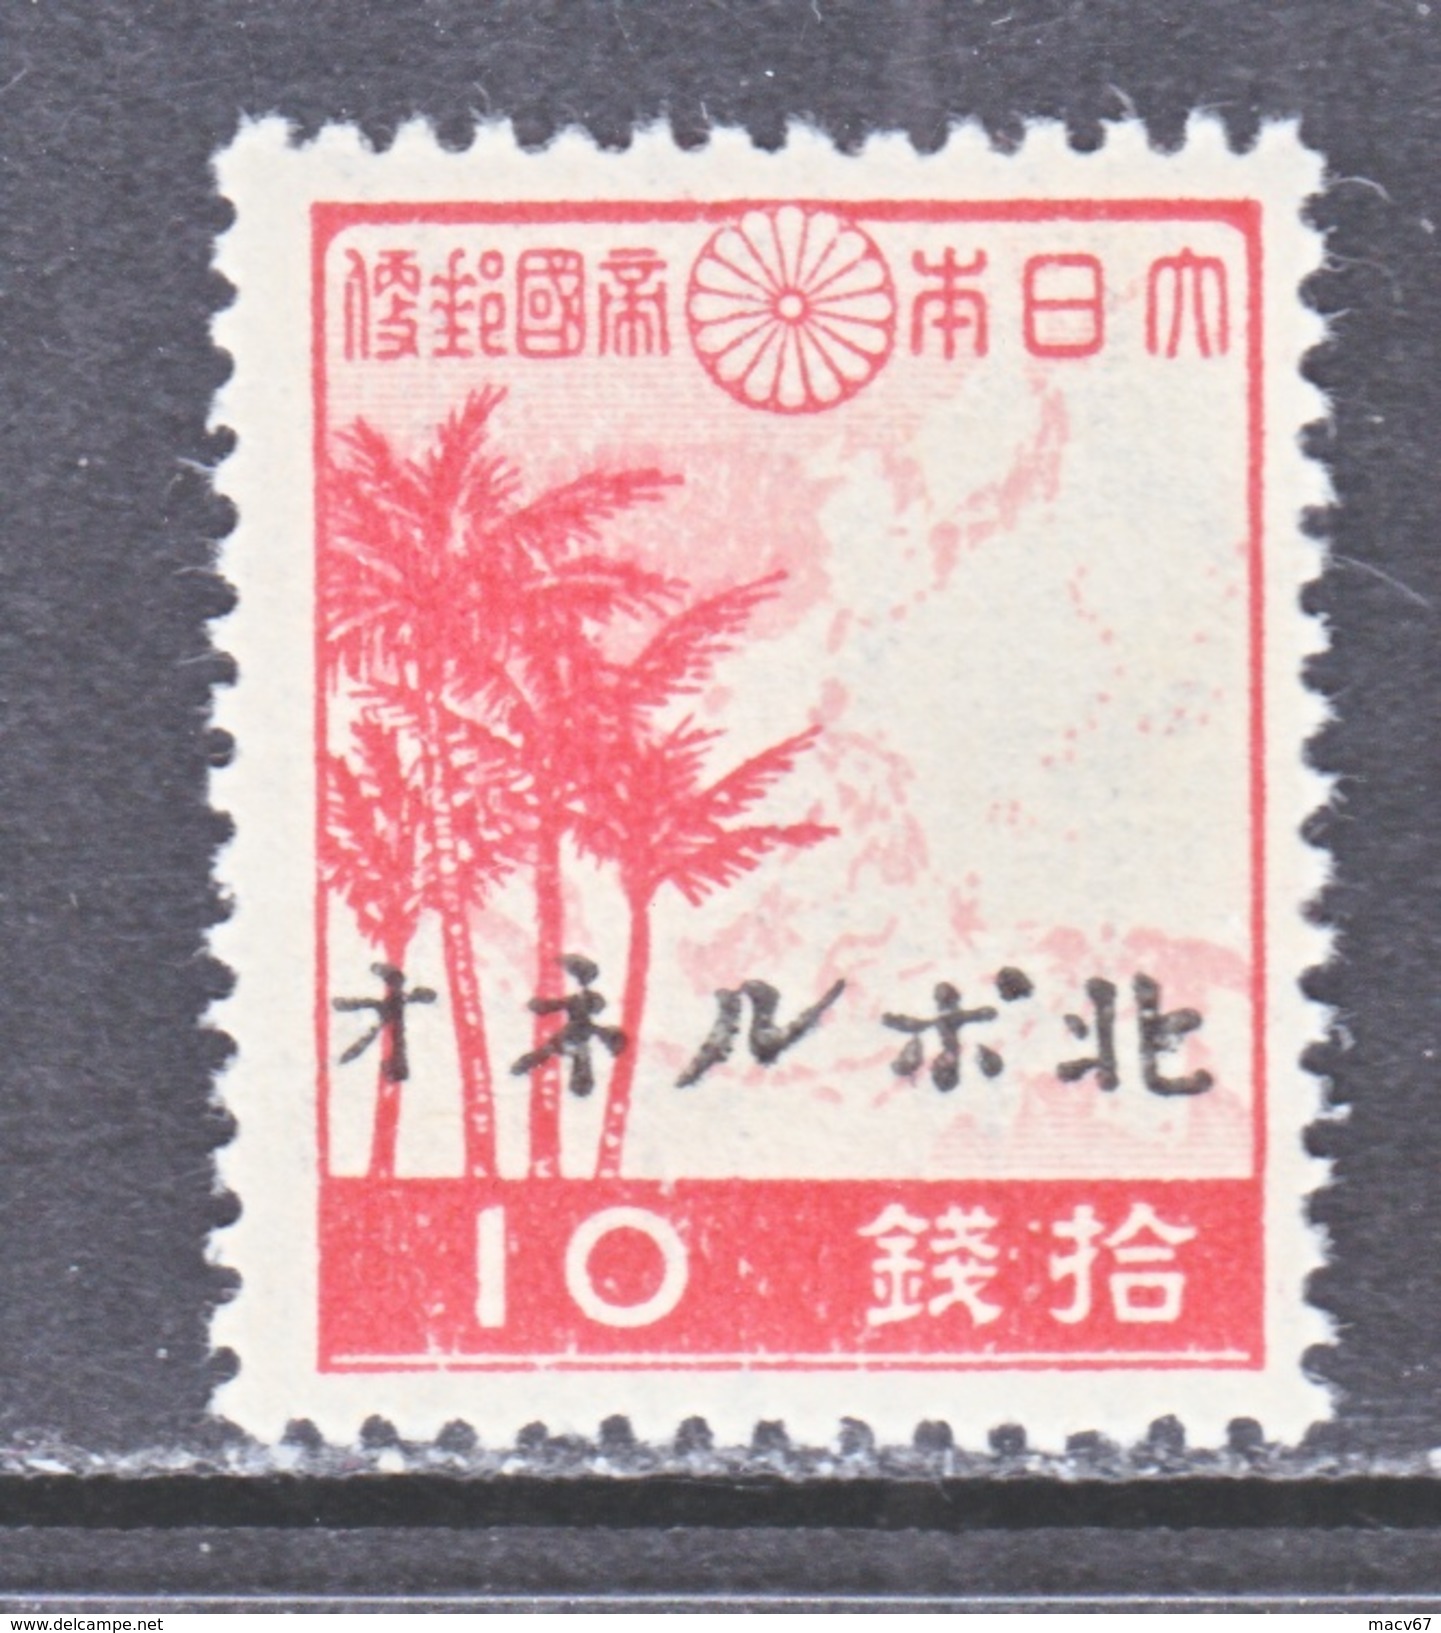 JAPANESE  OCCUP. NORTH  BORNEO  N 41   ** - Occupation Japonaise